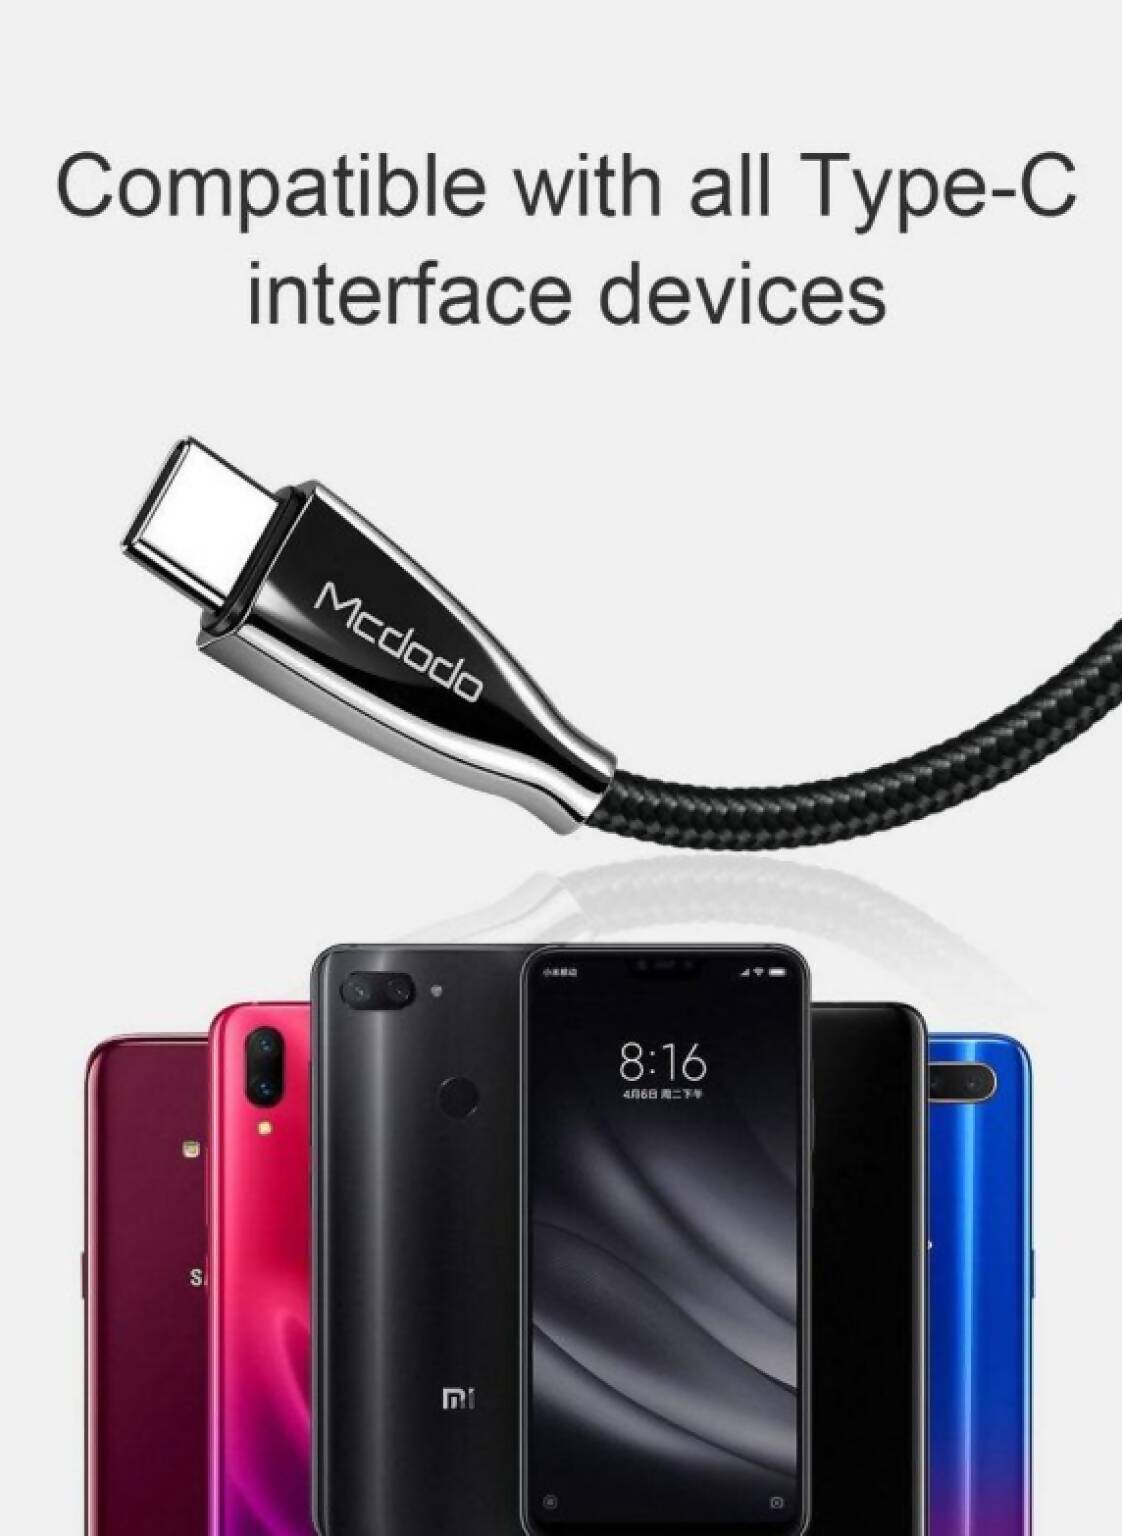 Mcdodo USB Type-C to USB Type-C 2.0 Charger Cable